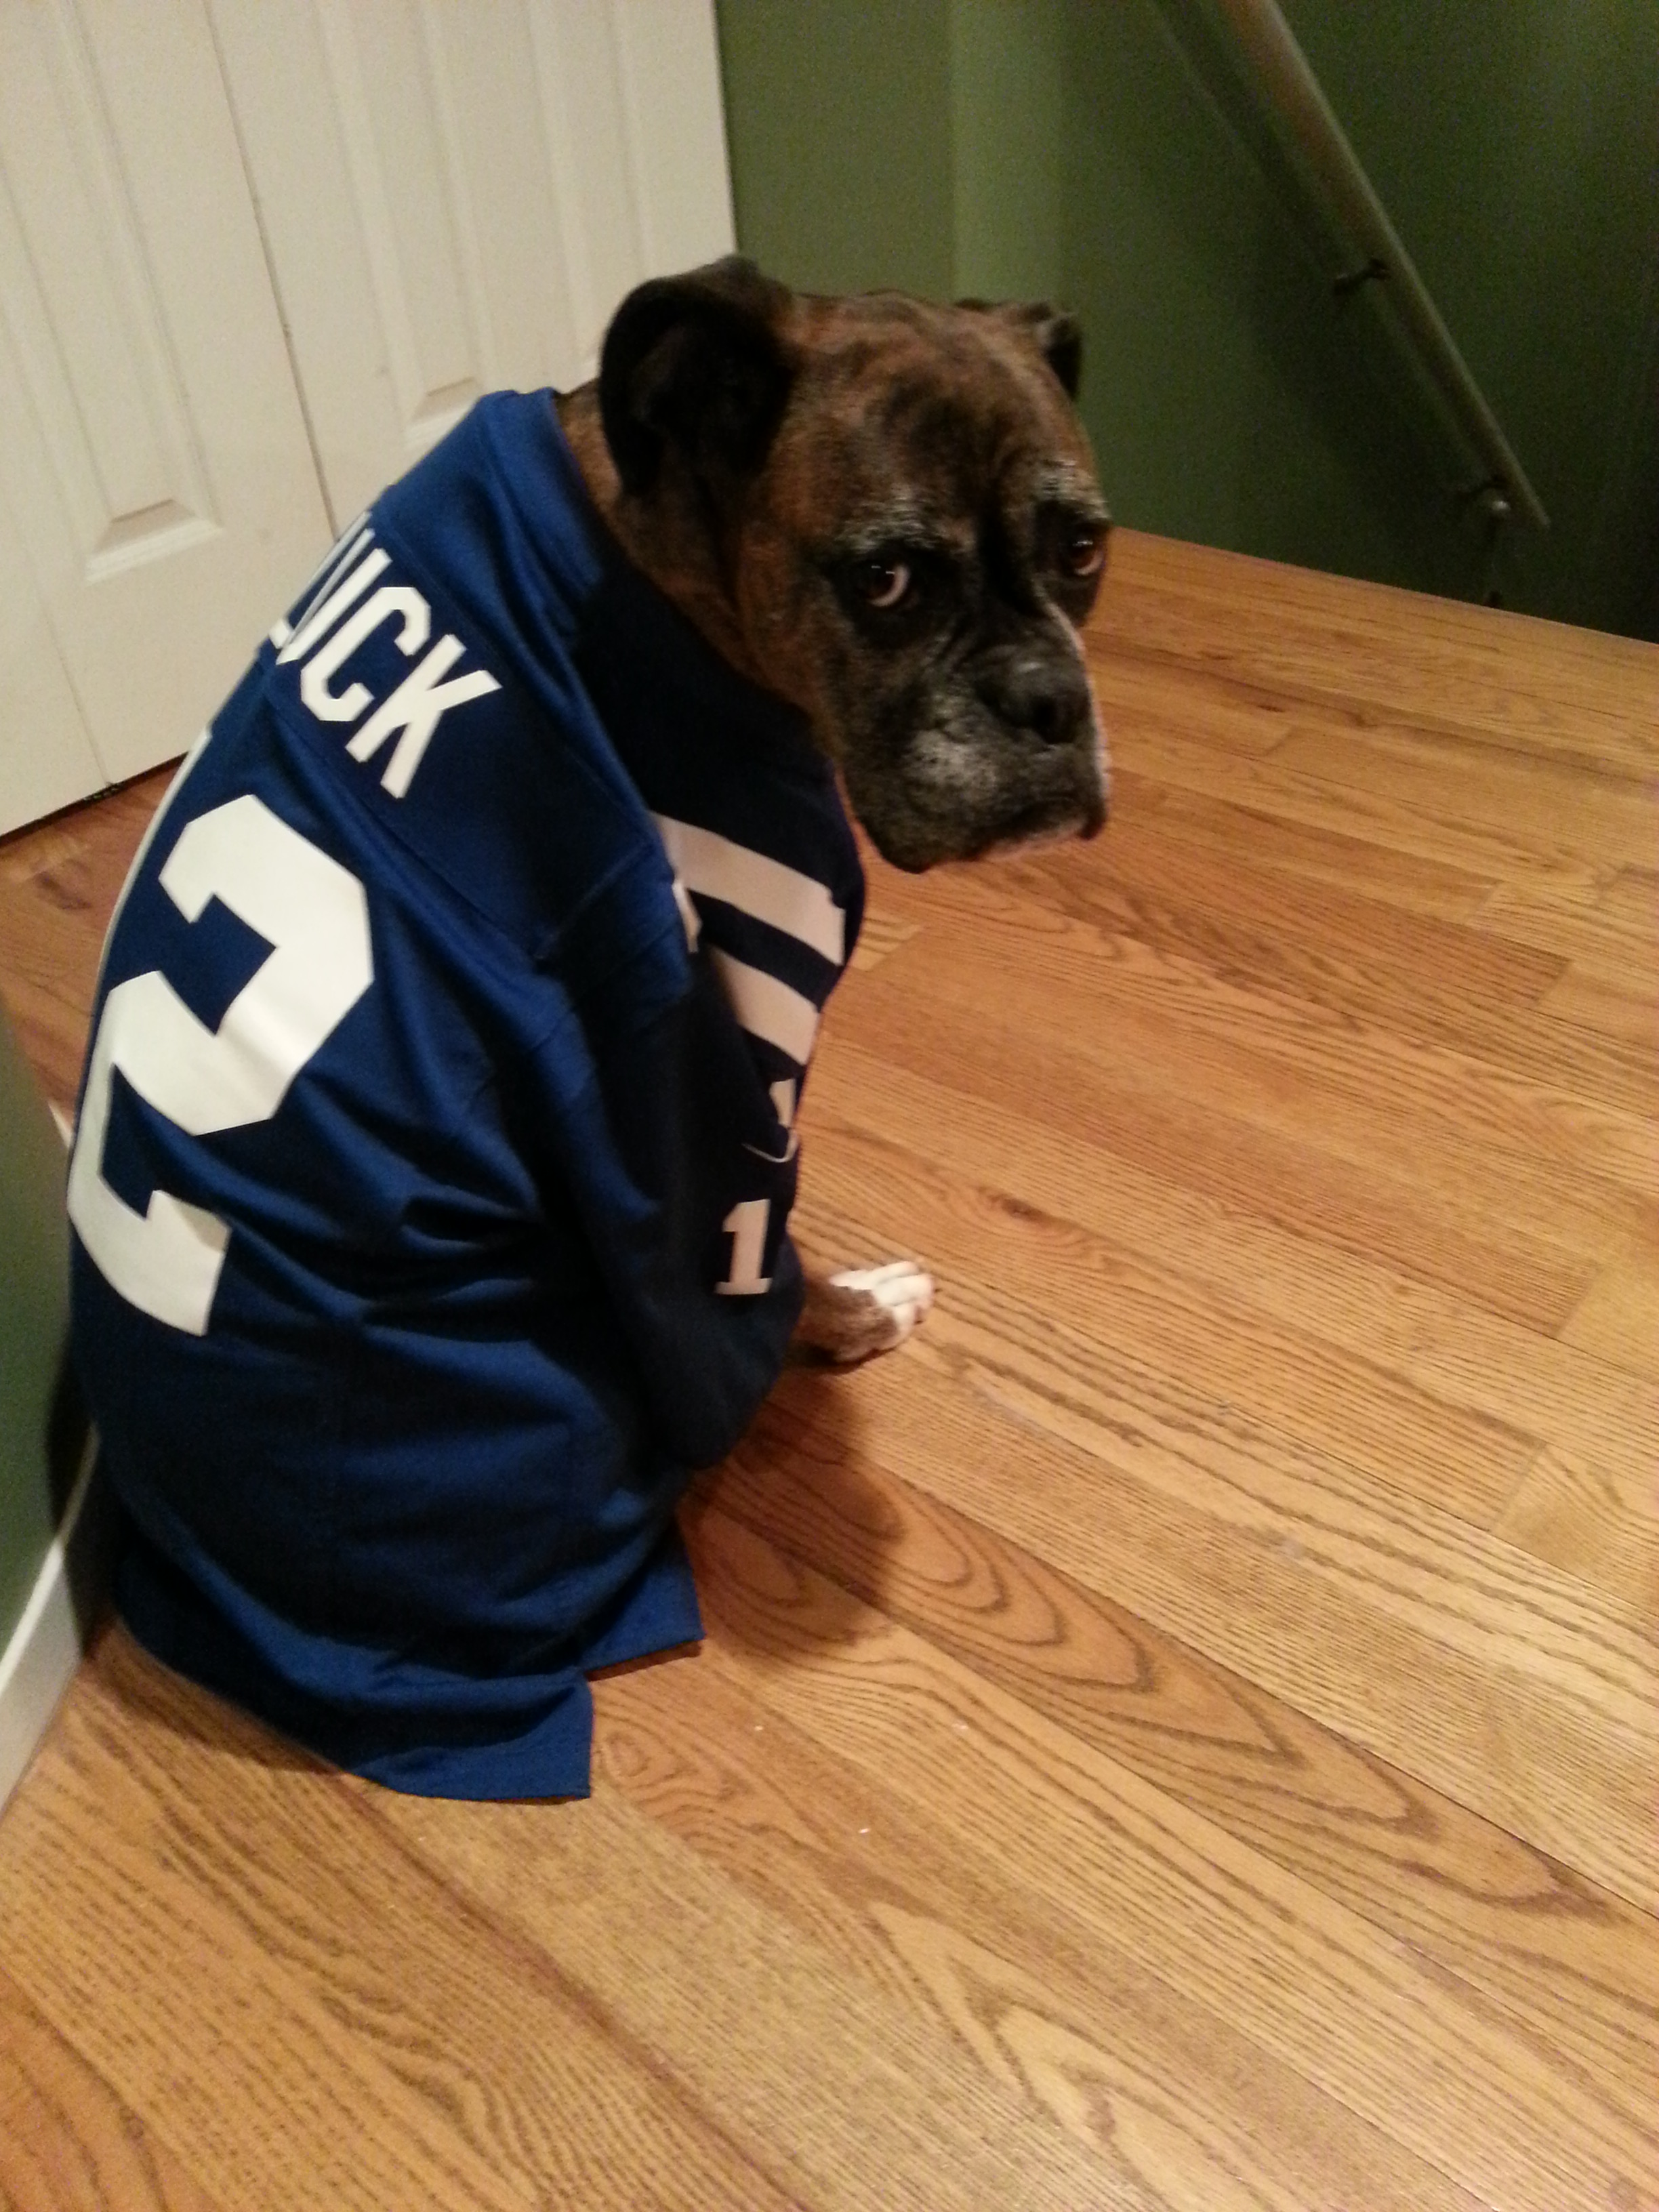 The "unofficial" Boxer mascot of the Indianapolis Colts.